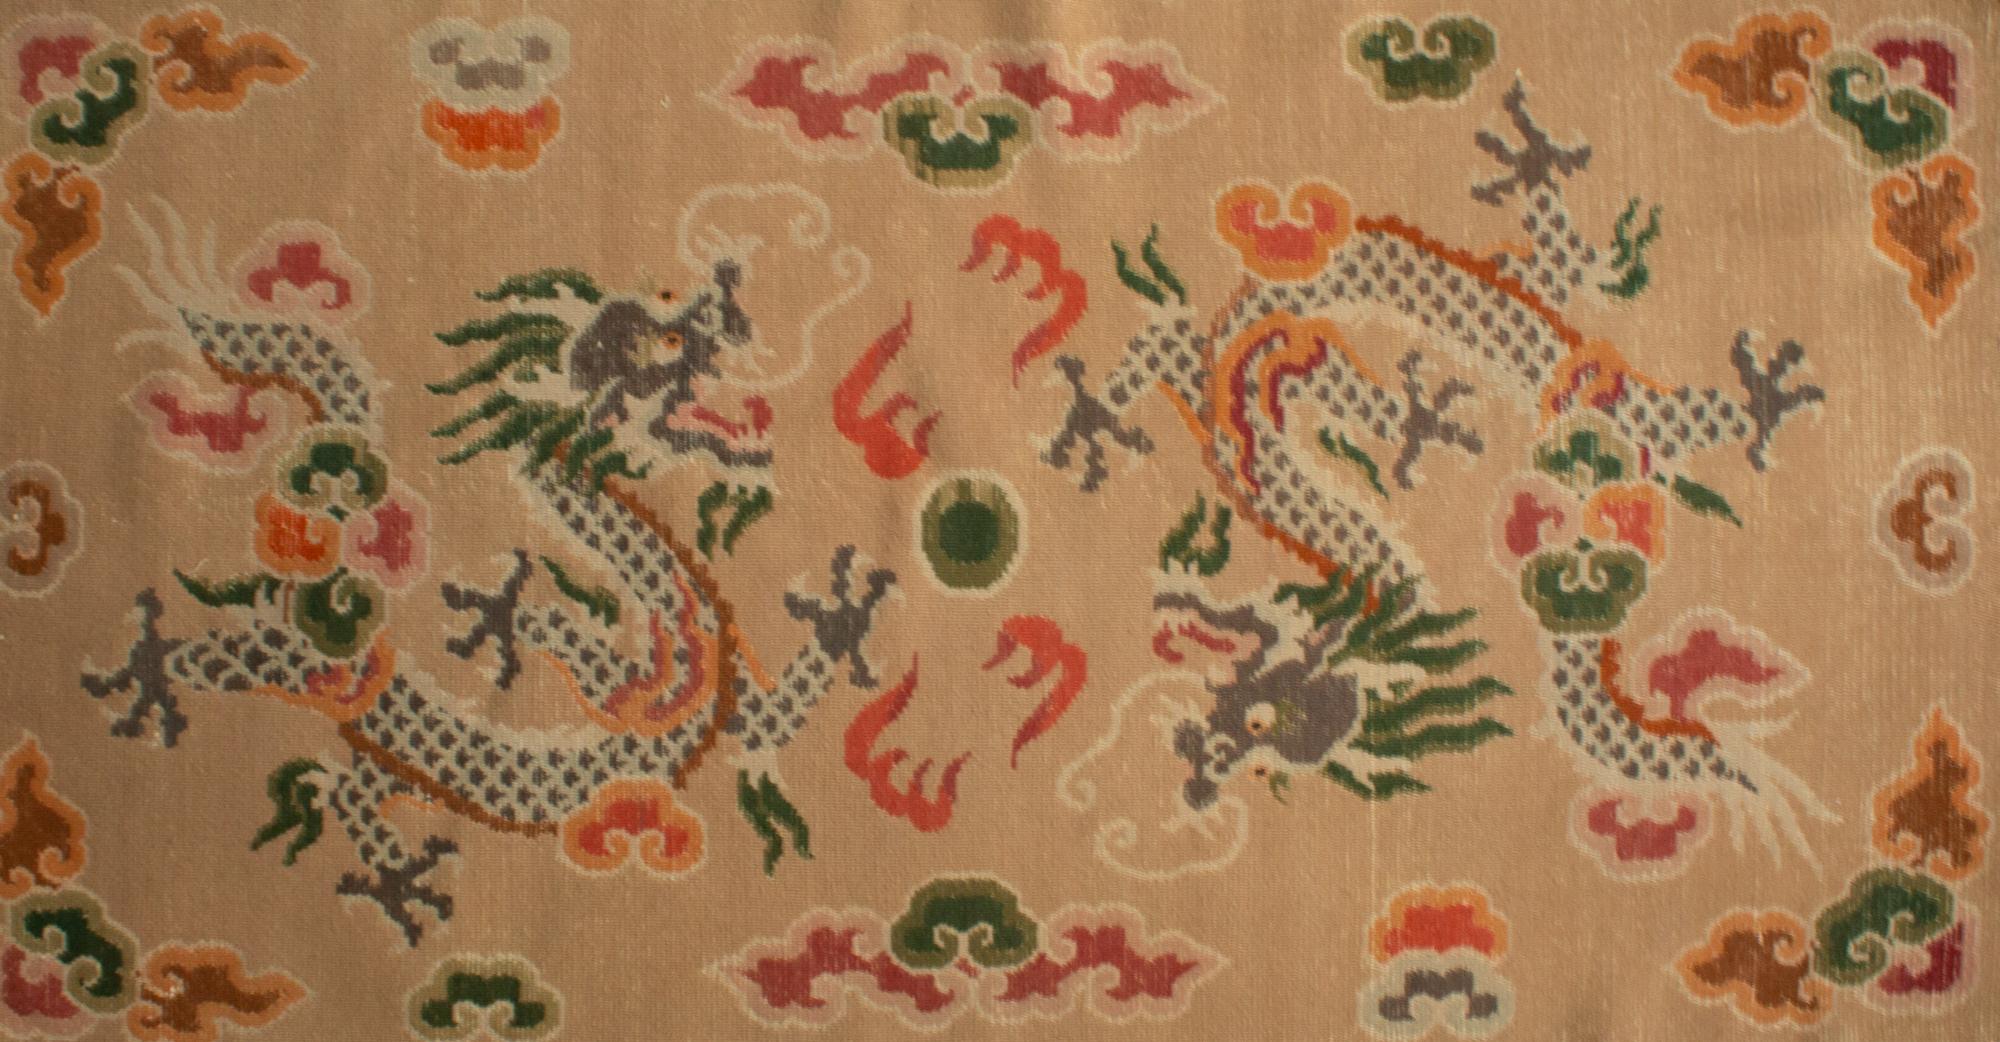 Sitting and sleeping Tibetan double dragon Khaden rug, circa 1970s, warm beige ground weave with two colorful dragons, symbols are benevolent creatures, protectors of Buddhism and full of creative energy, chasing the Flaming Pearl (in the middle), a